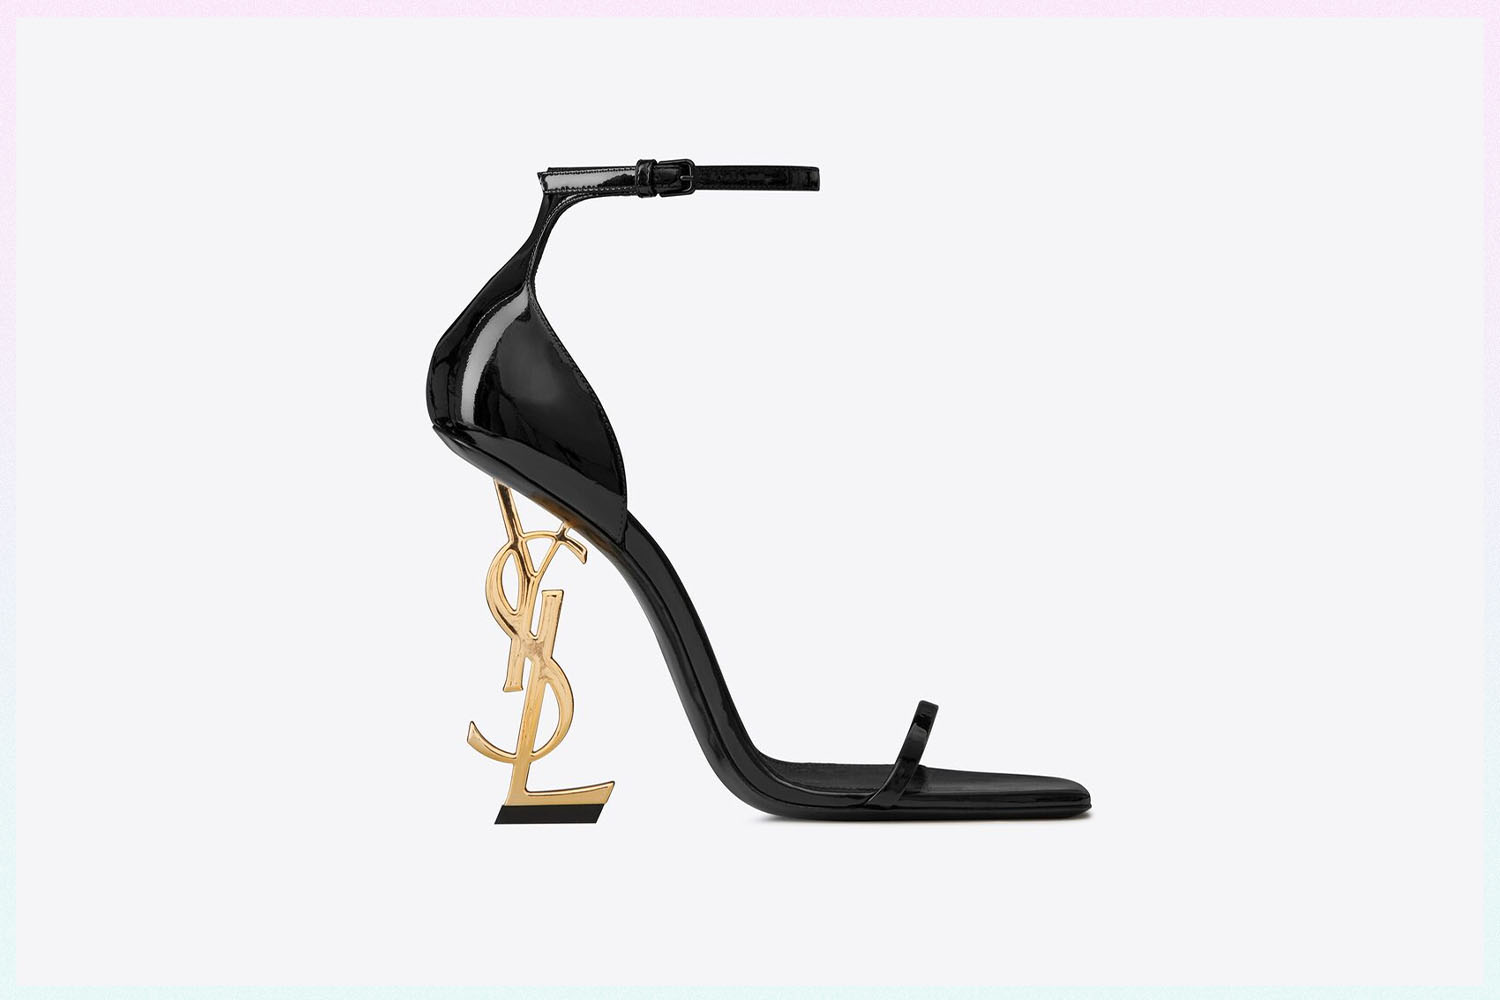 YSL Opyum Heels in patent leather and gold toned heel